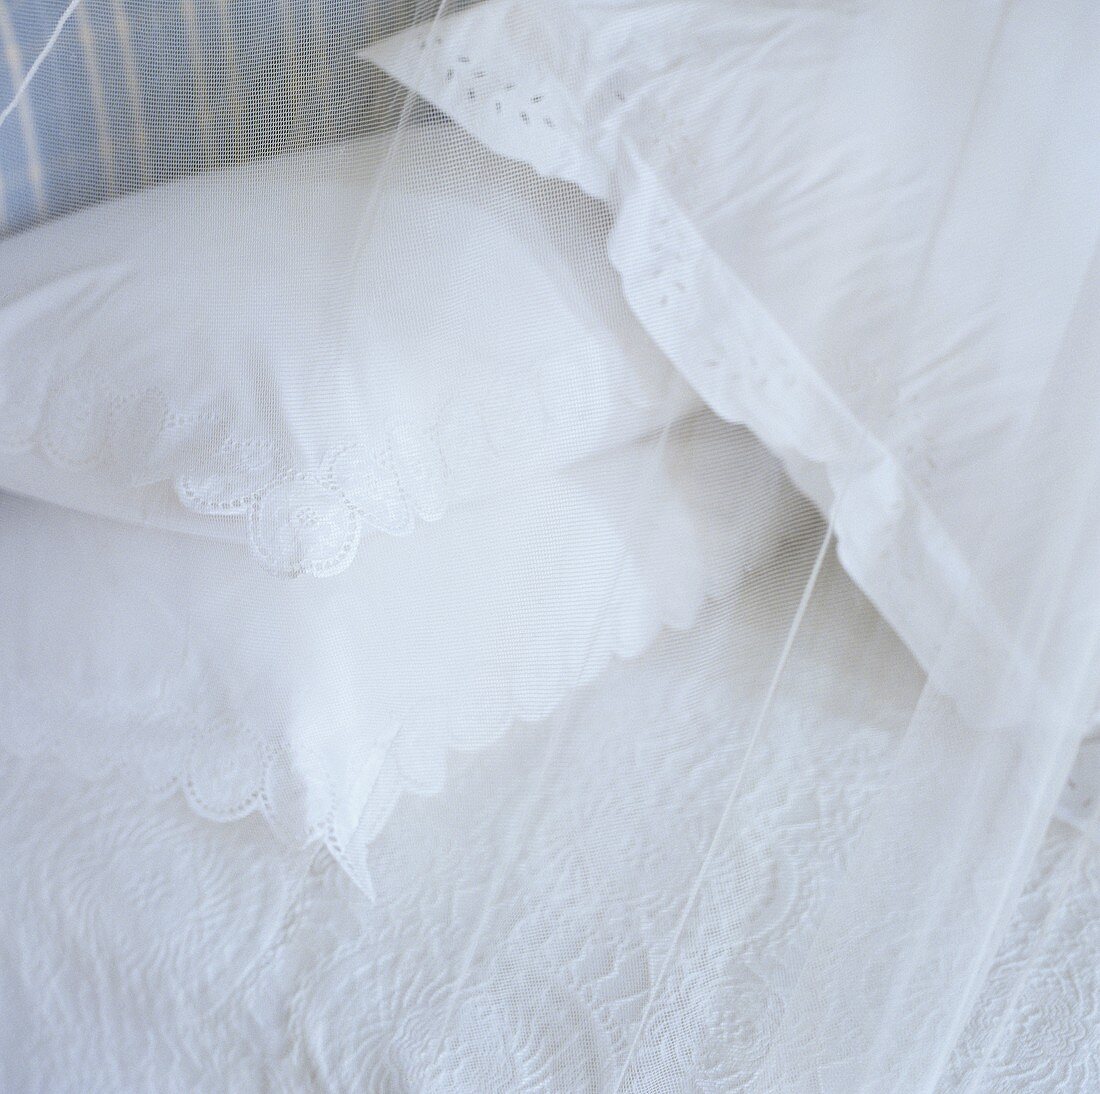 A white cushion with a lace border